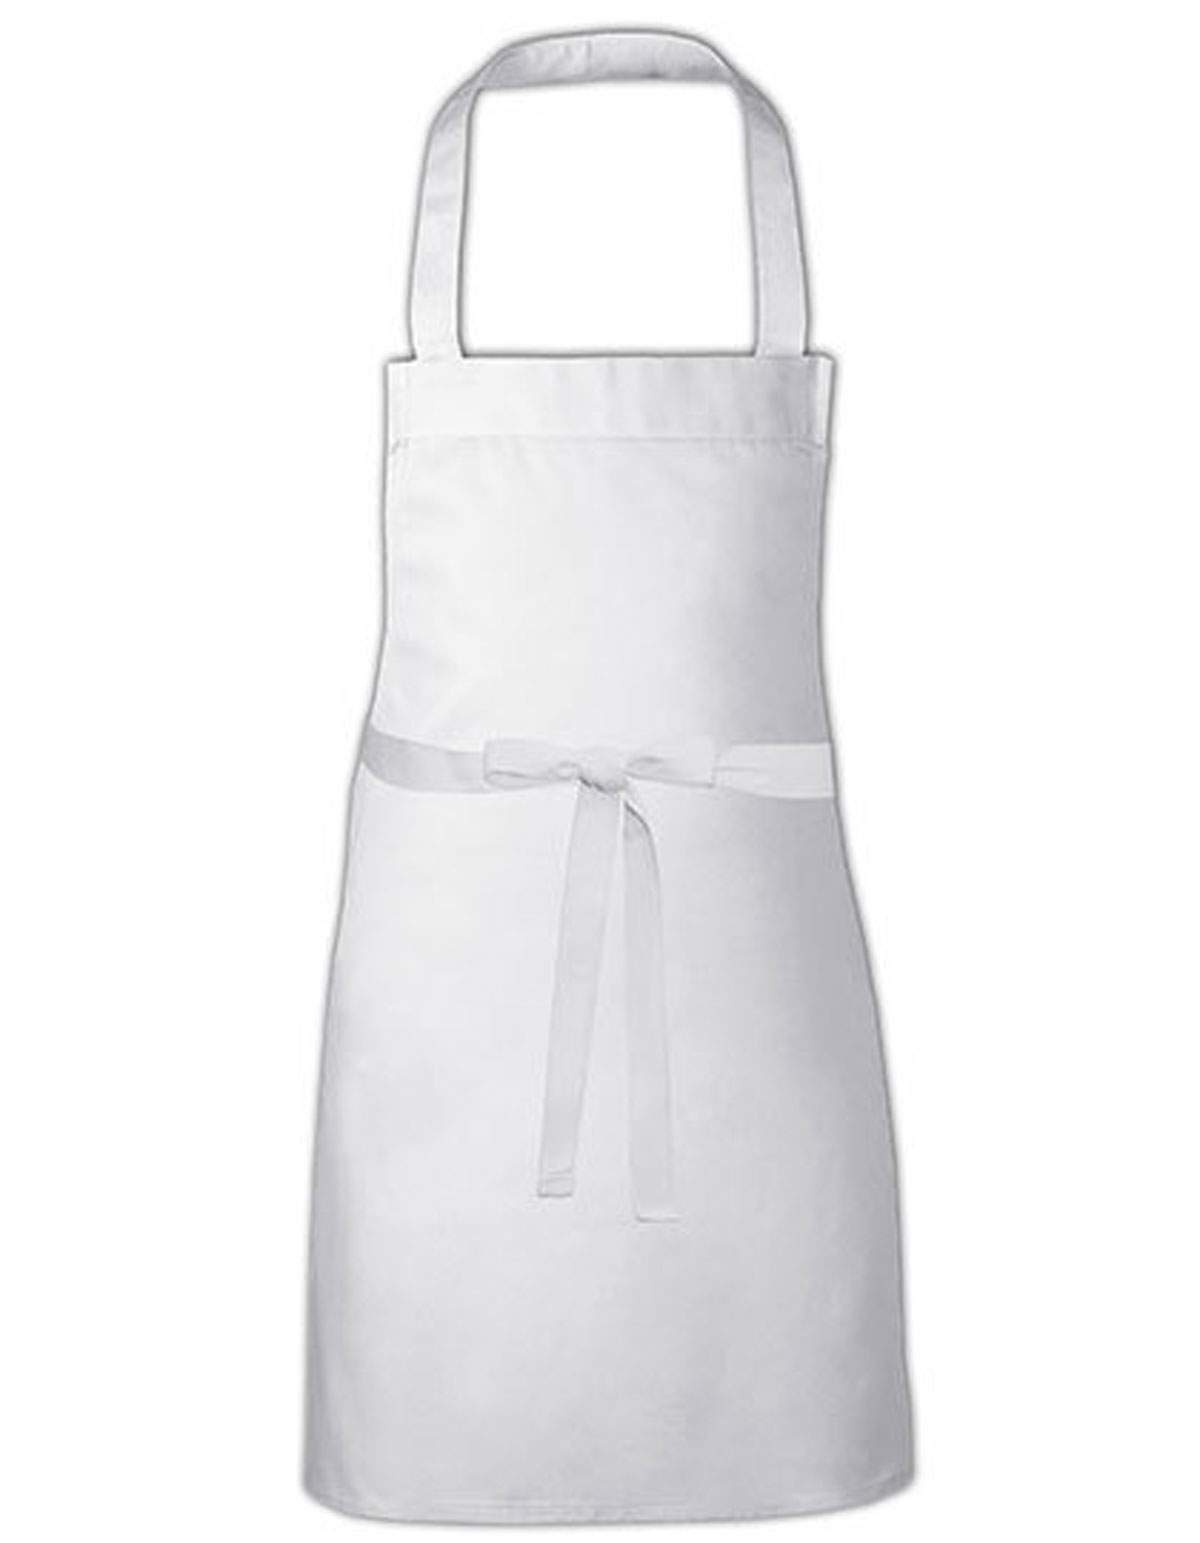 Kids´ Barbecue Apron Sublimation X977